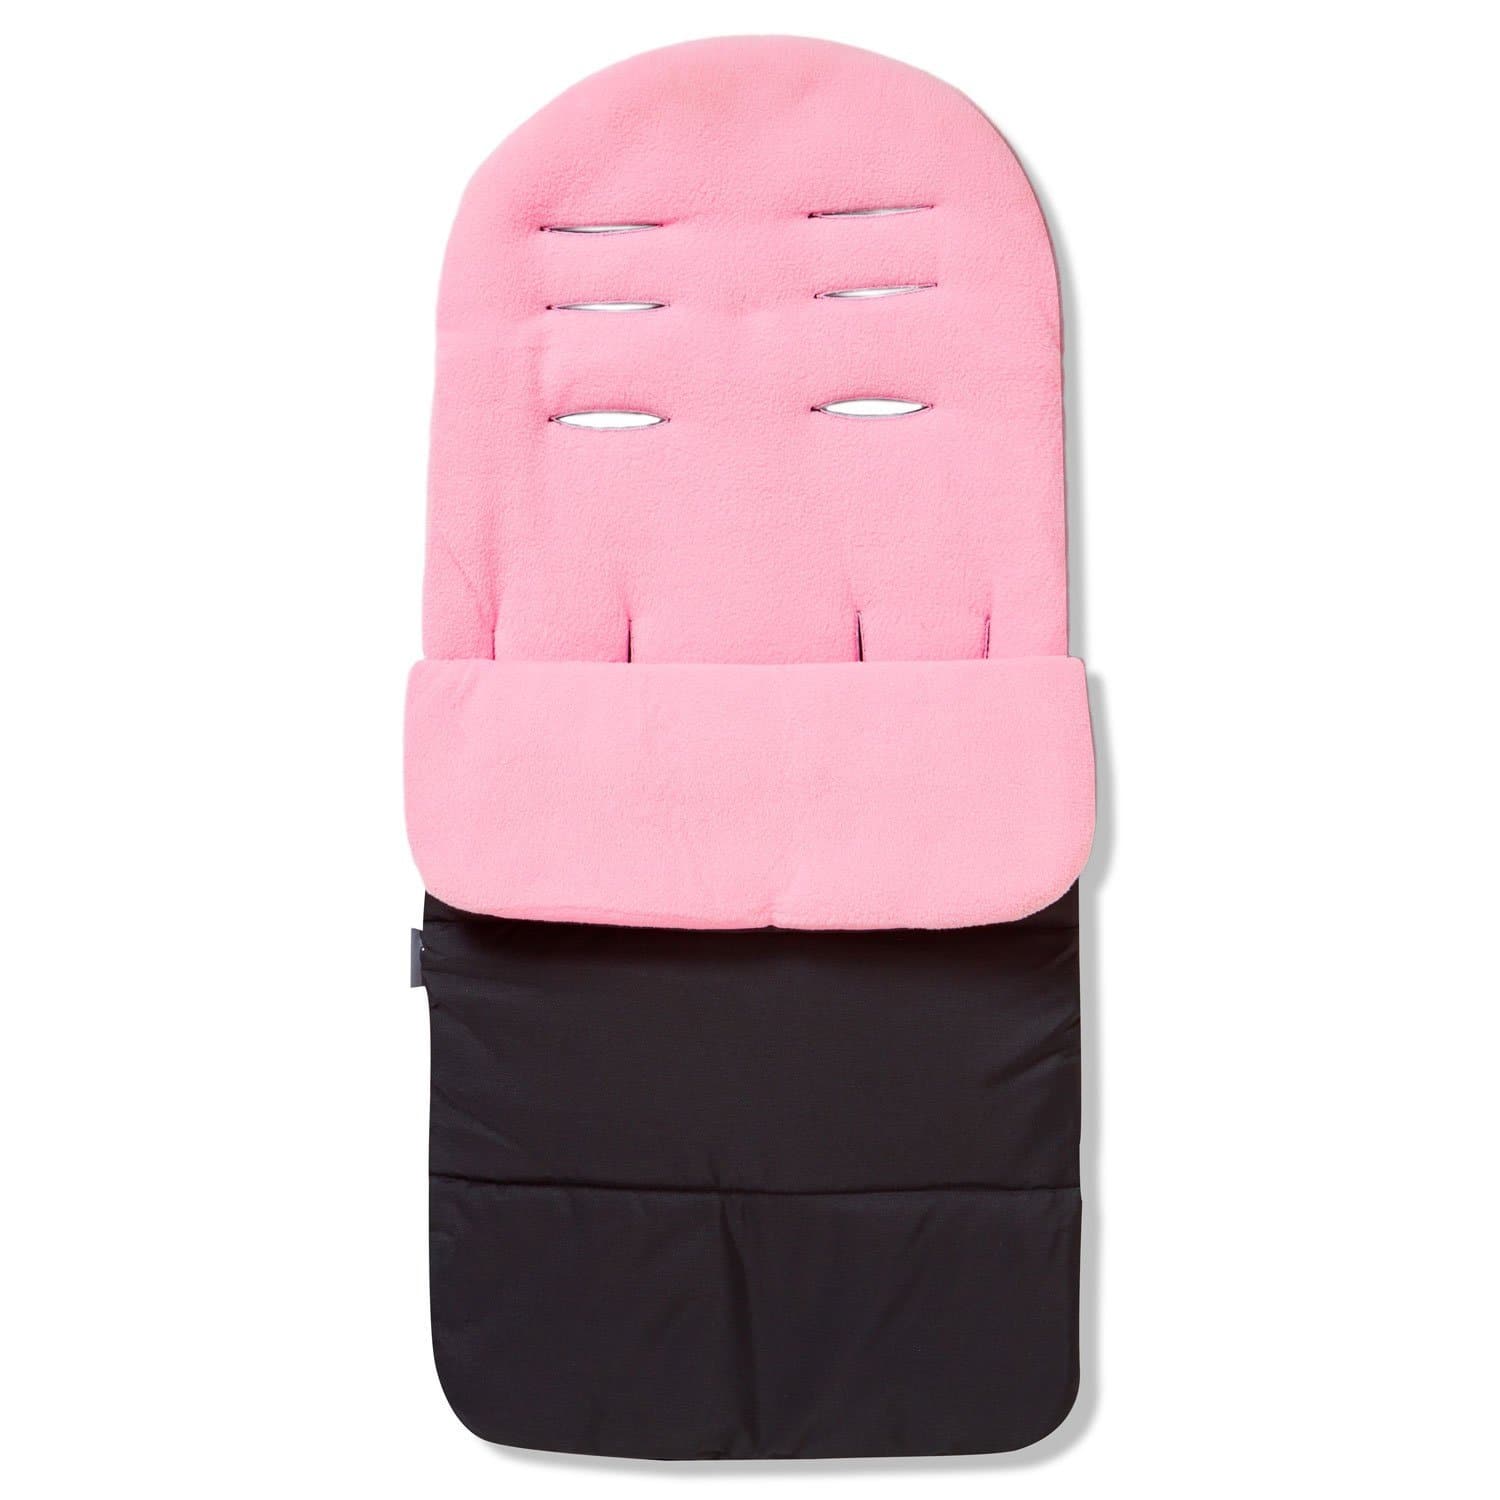 Premium Footmuff / Cosy Toes Compatible with My Babiie - Candy Pink / Fits All Models | For Your Little One